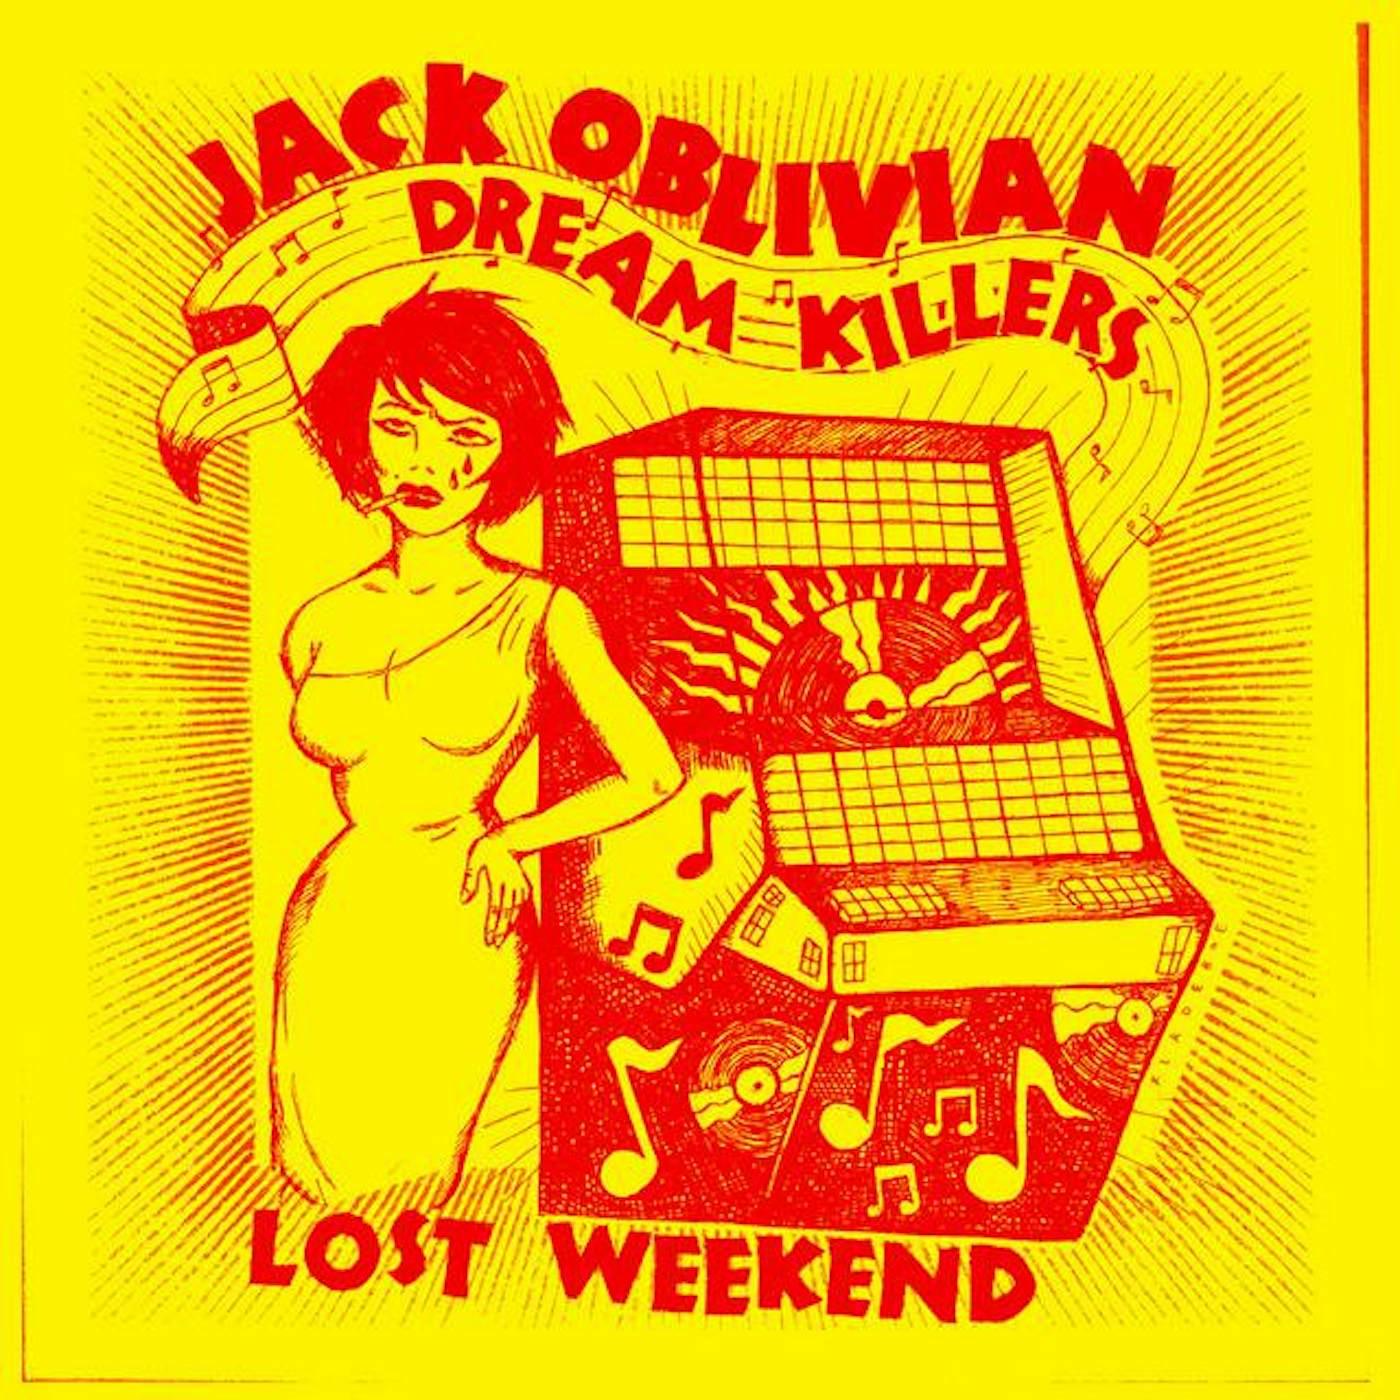 Jack Oblivian and the Dream Killers